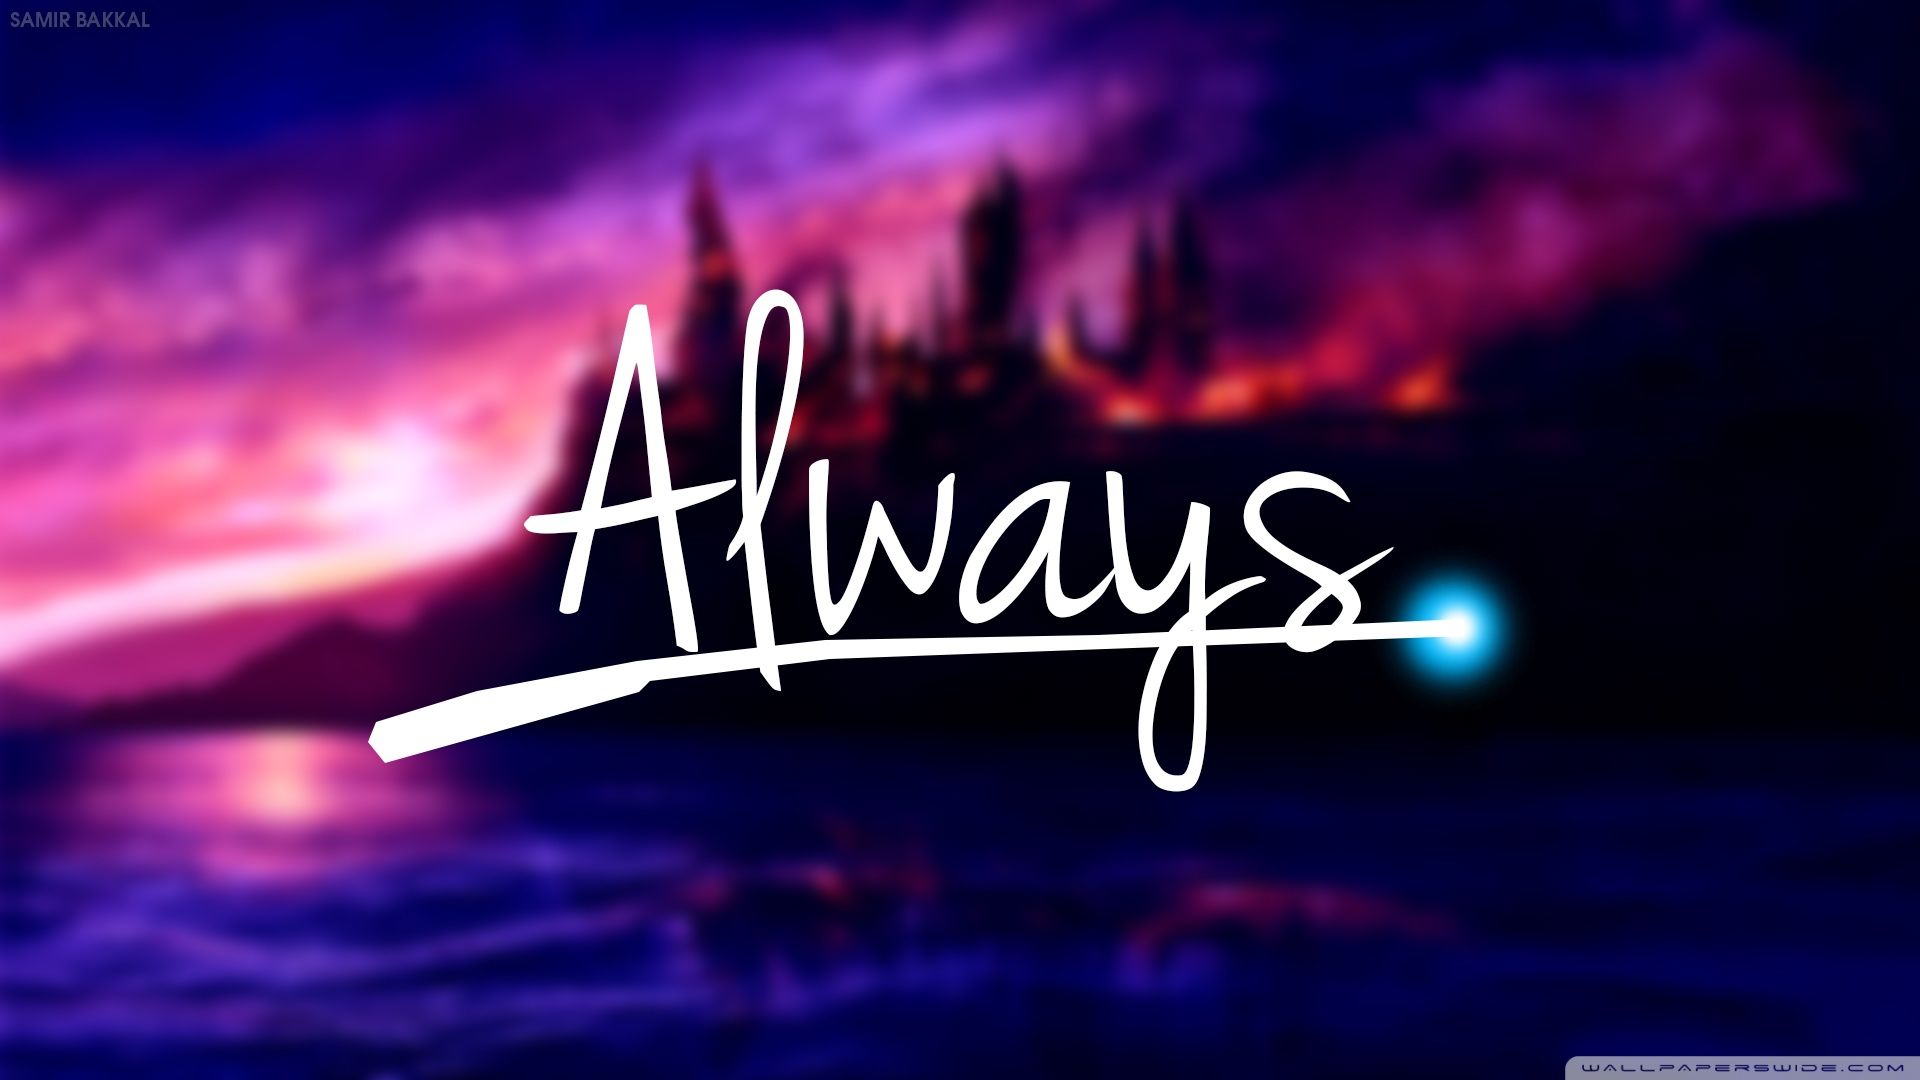 Download Always Harry Potter HD Wallpaper. Harry potter quotes